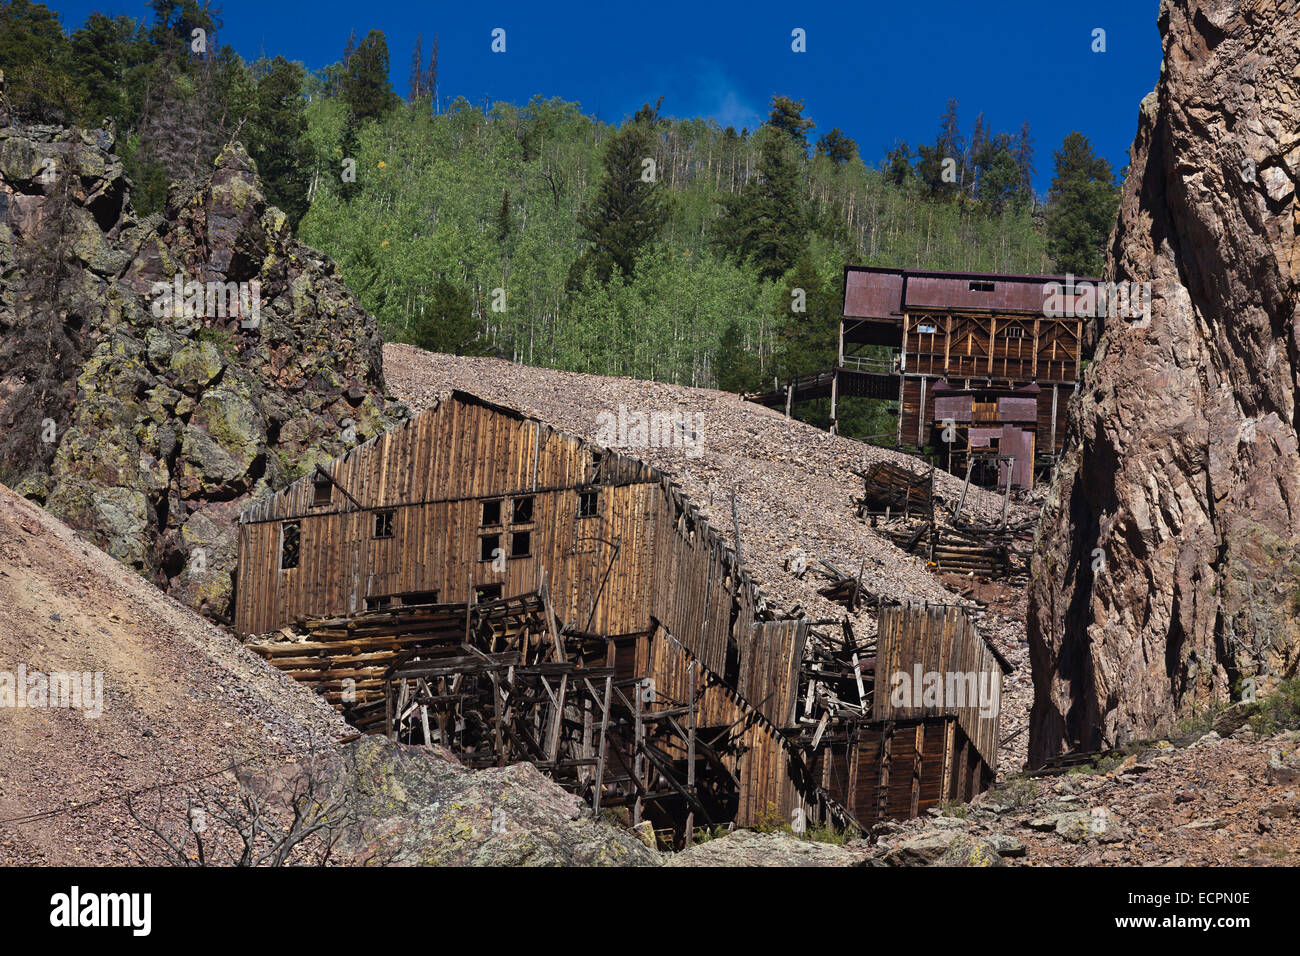 The BACHELOR MINE in CREEDE COLORADO where silver was mined until 1985 Stock Photo